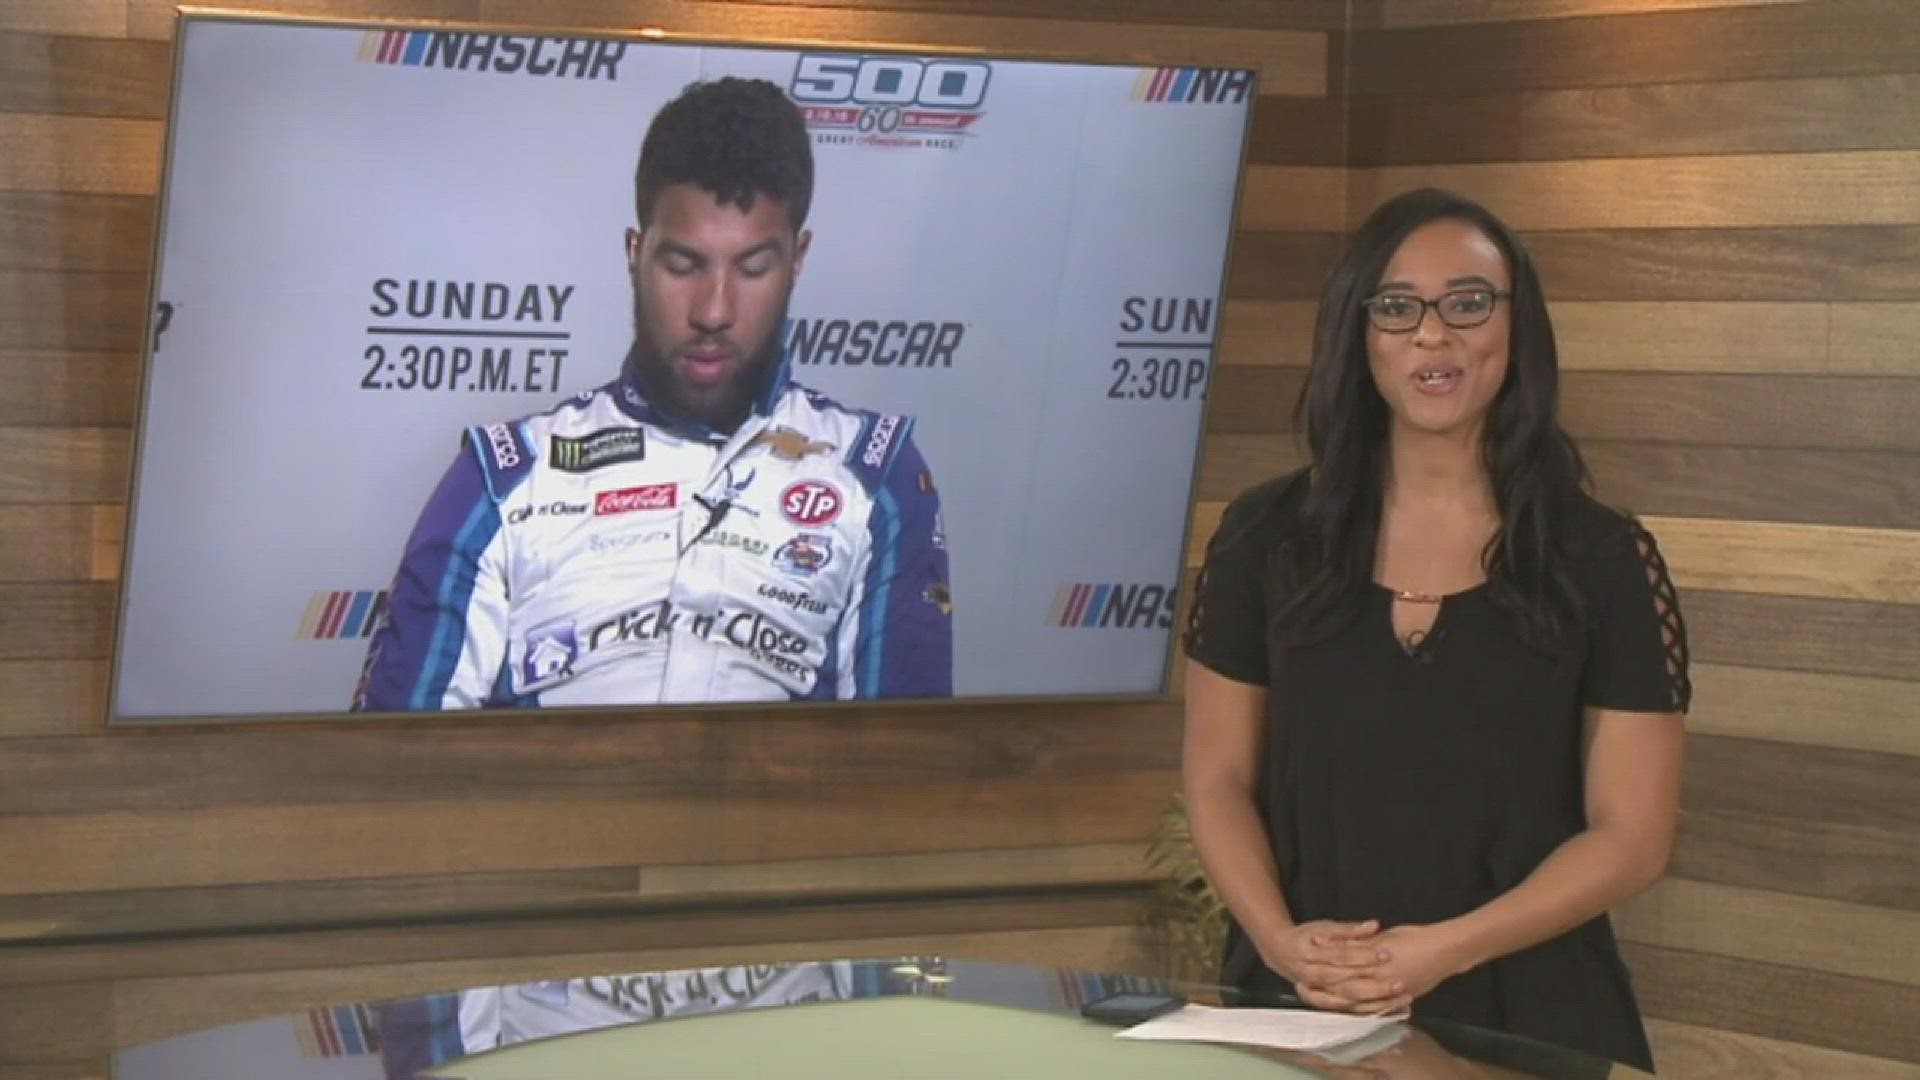 Darrell Wallace Jr., who became the first full-time African-American driver in the Monster Energy NASCAR Cup series since Wendell Scott in 1971, joins ABC10's Lina Washington to preview the weekend at the Daytona 500.